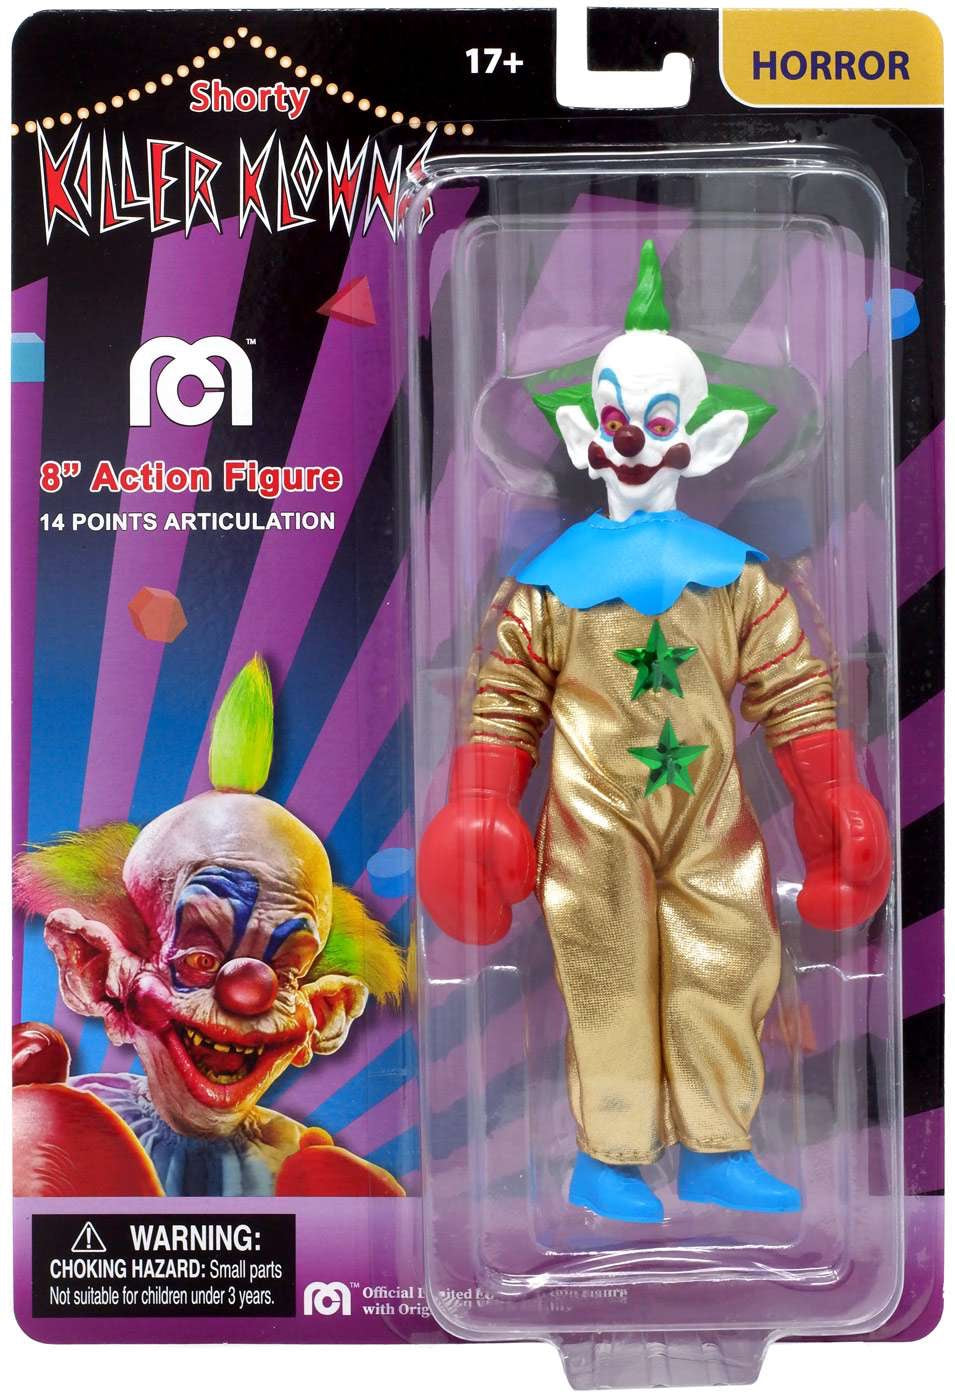 Damaged Package Mego Movies Wave 17 - Killer Klowns (Shorty) 8" Action Figure